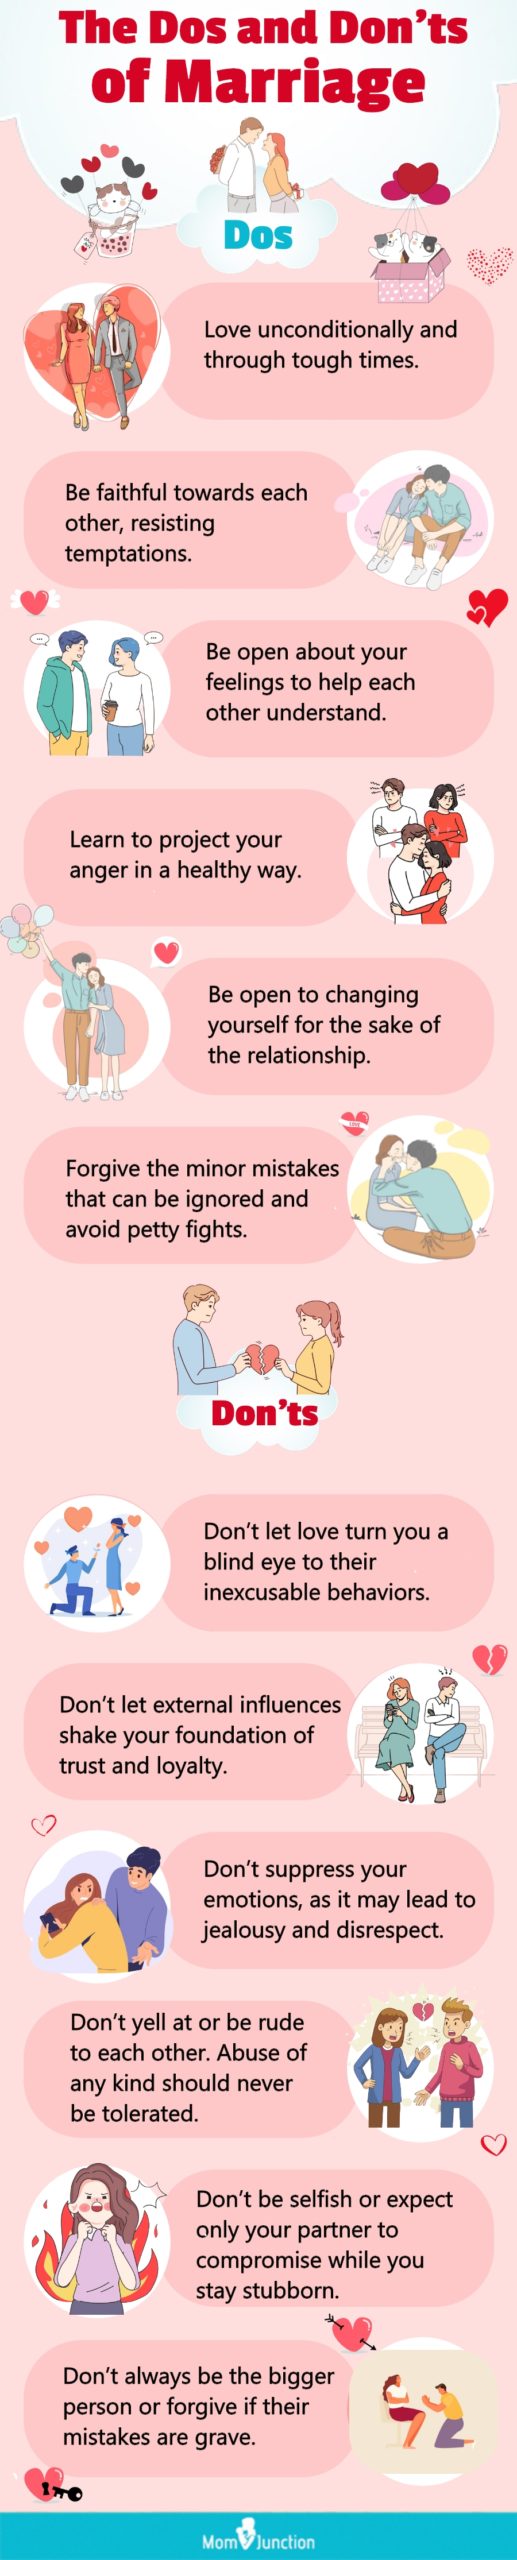 the dos and don’ts of marriage (infographic)